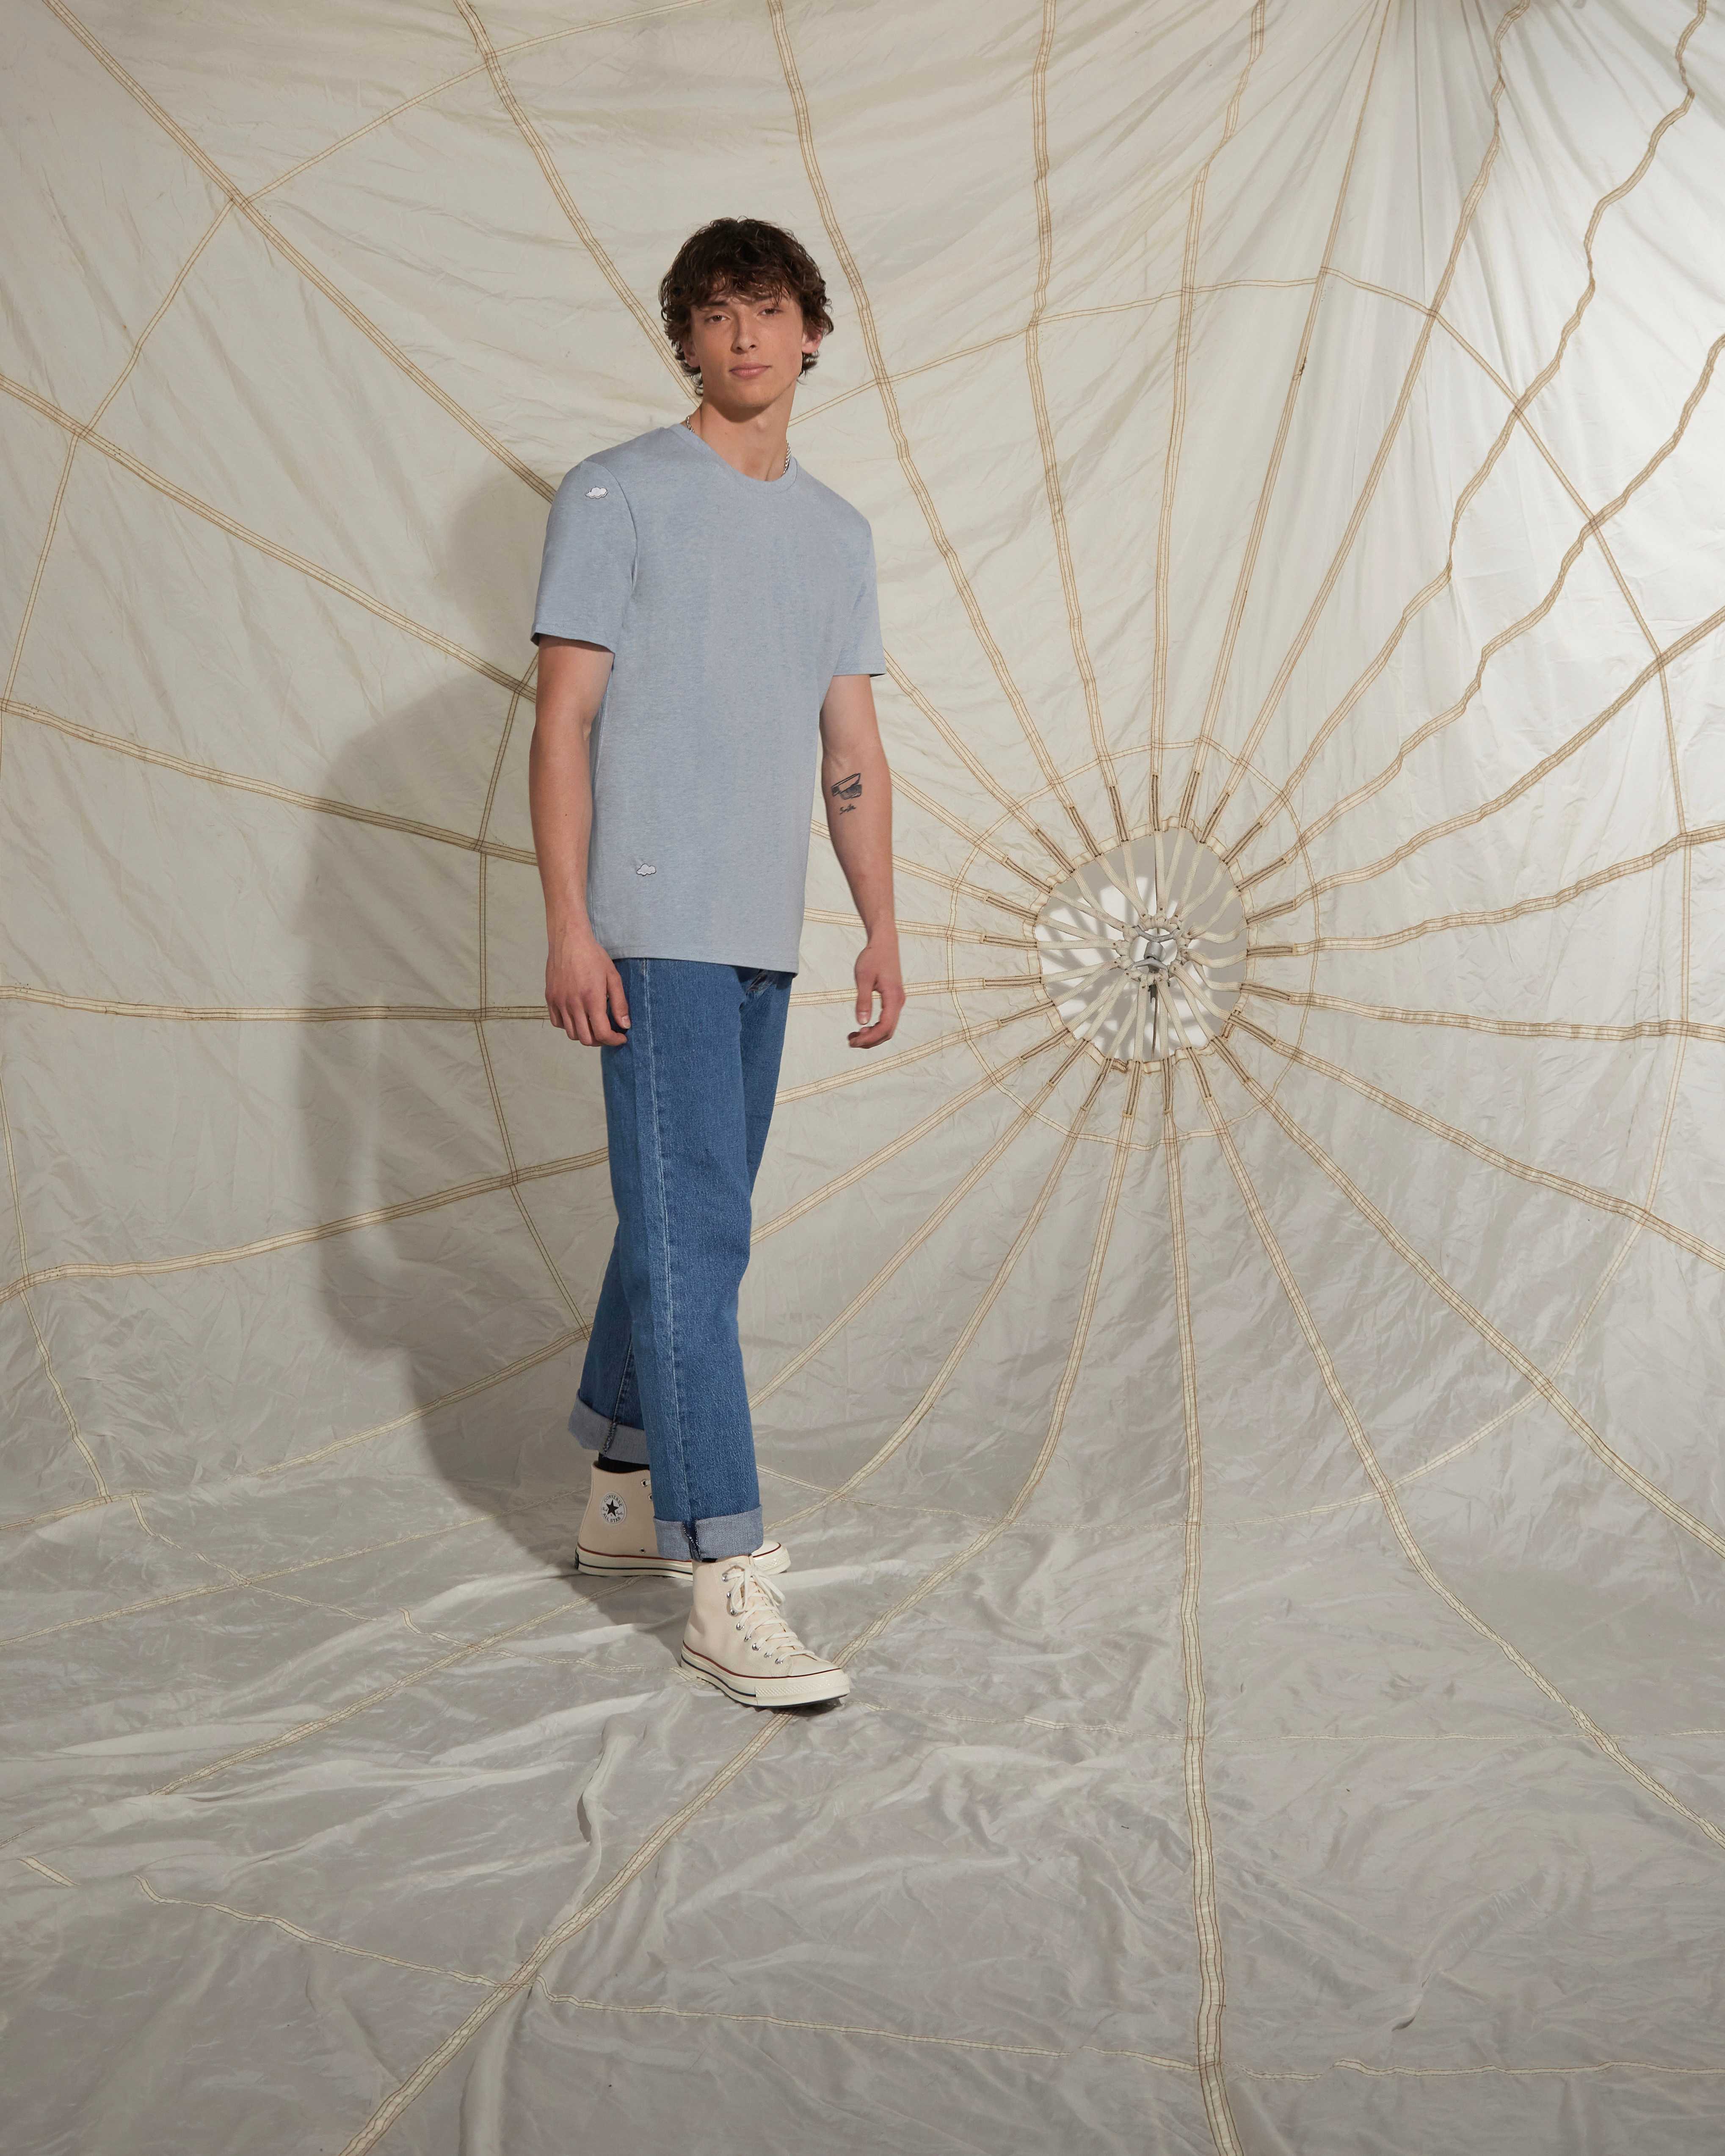 A man wearing a blue ingmarson top with clounds embroidered matched with blue levis jeans and cream converse shoes posing infront of a parachute. 